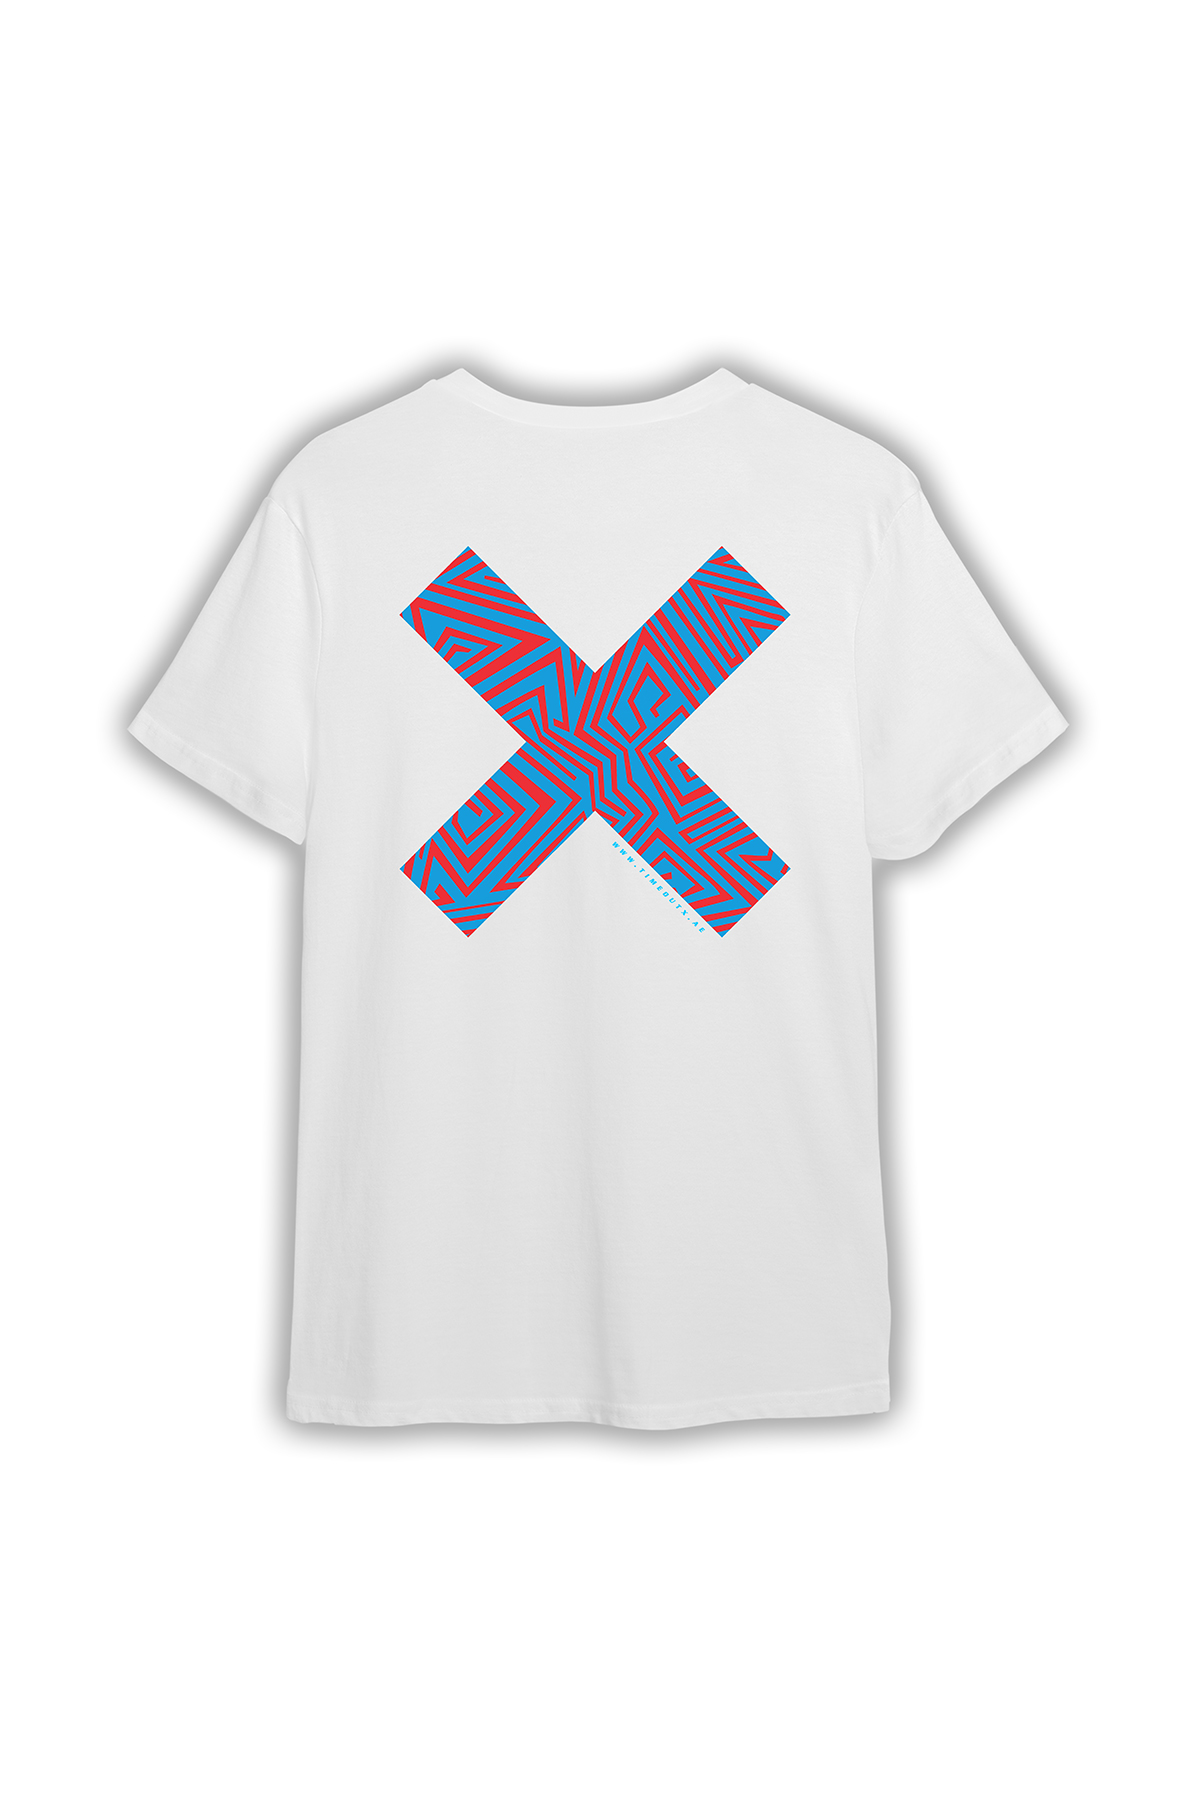 Unisex-Time-Out-X-Signature-Pure-Cotton-Fun-Pattern-White-T-shirt-for-Kids—Back